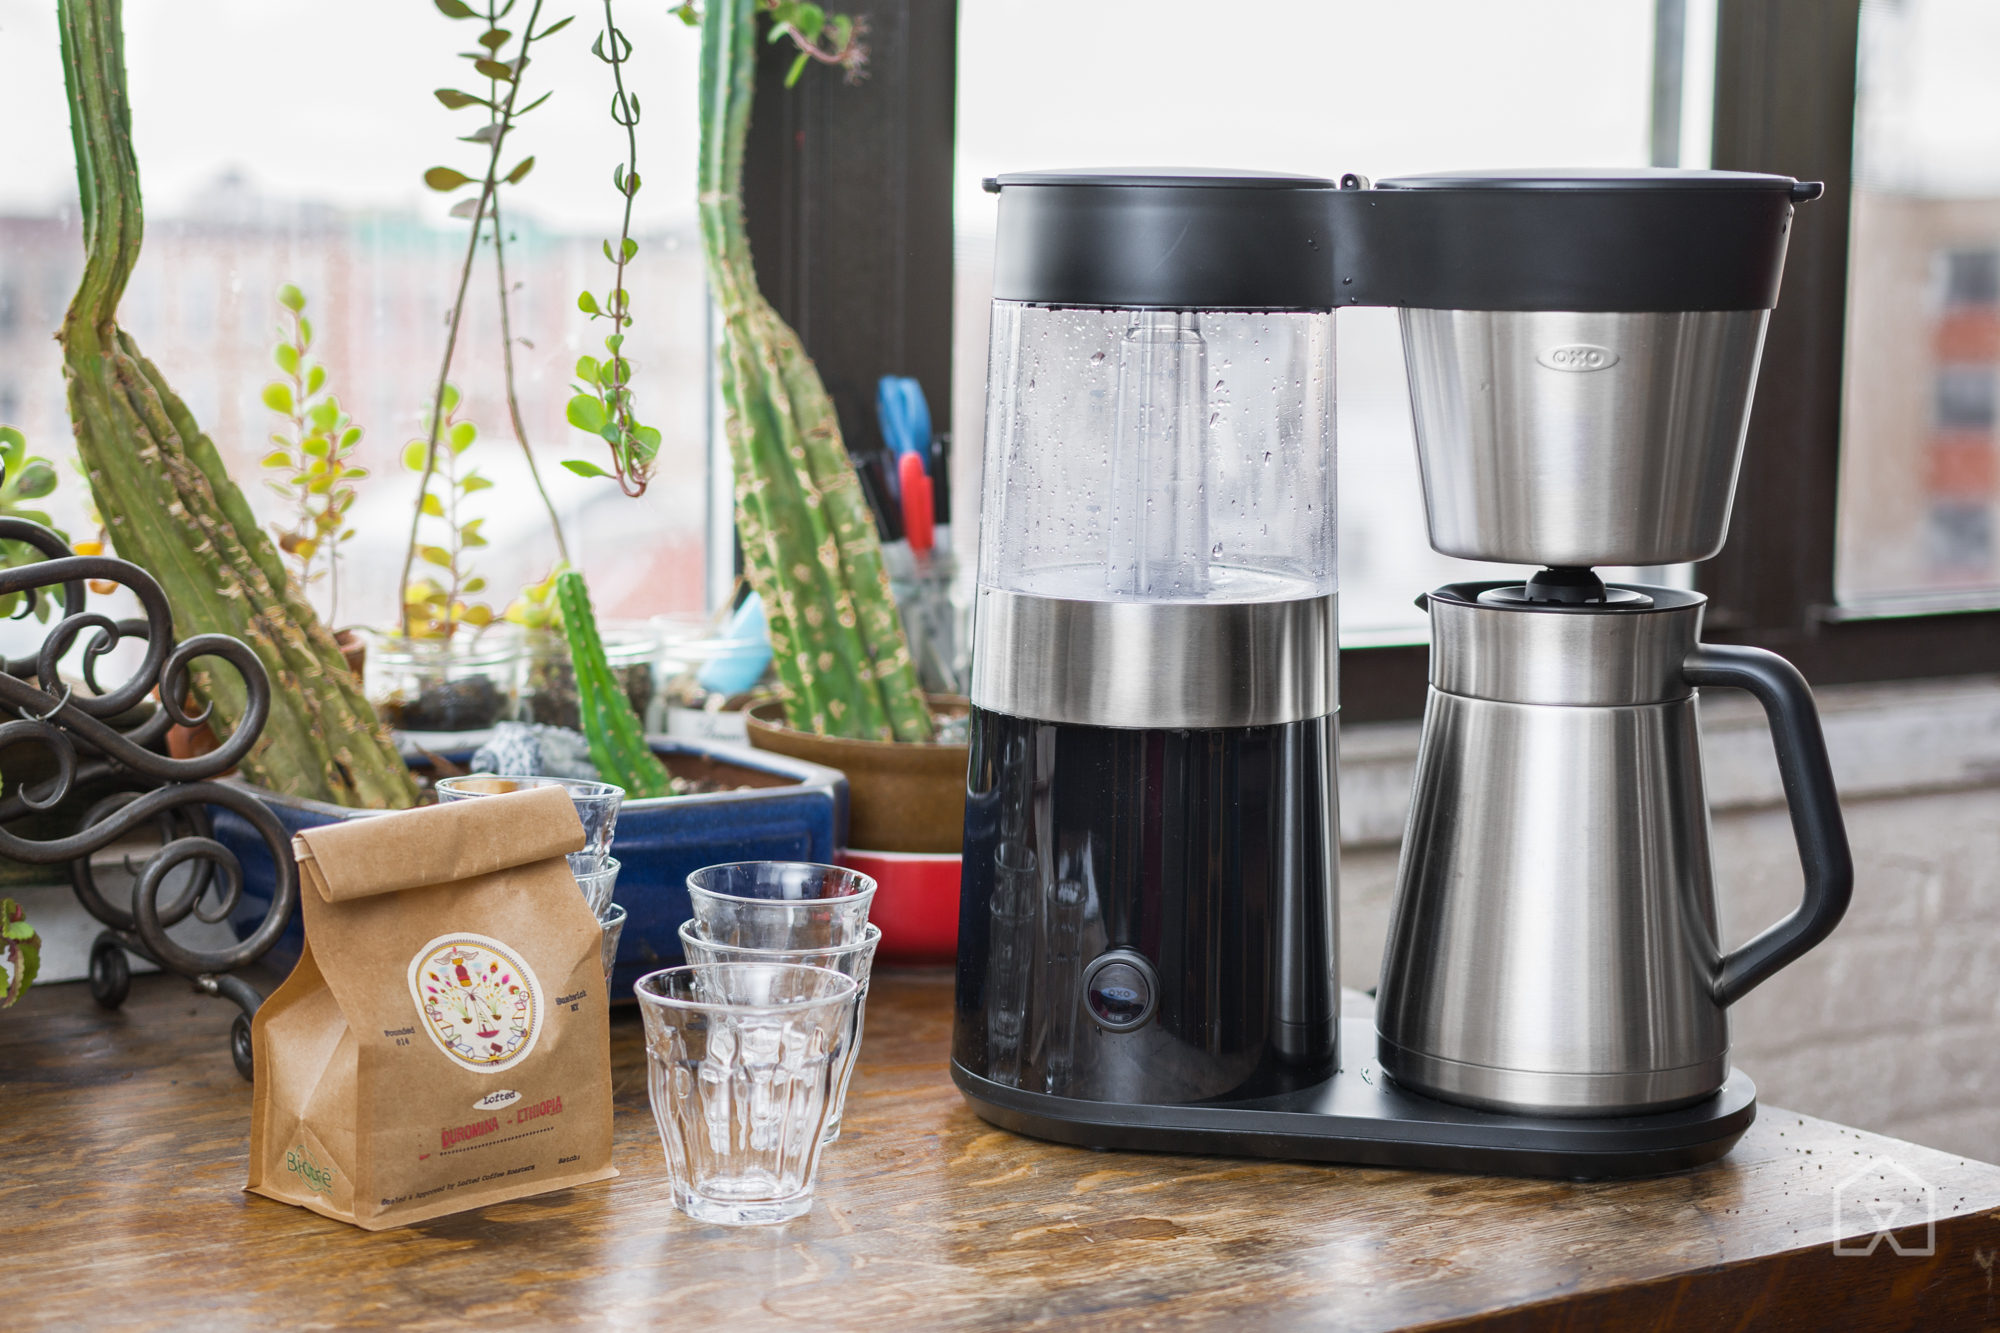 The best coffee maker